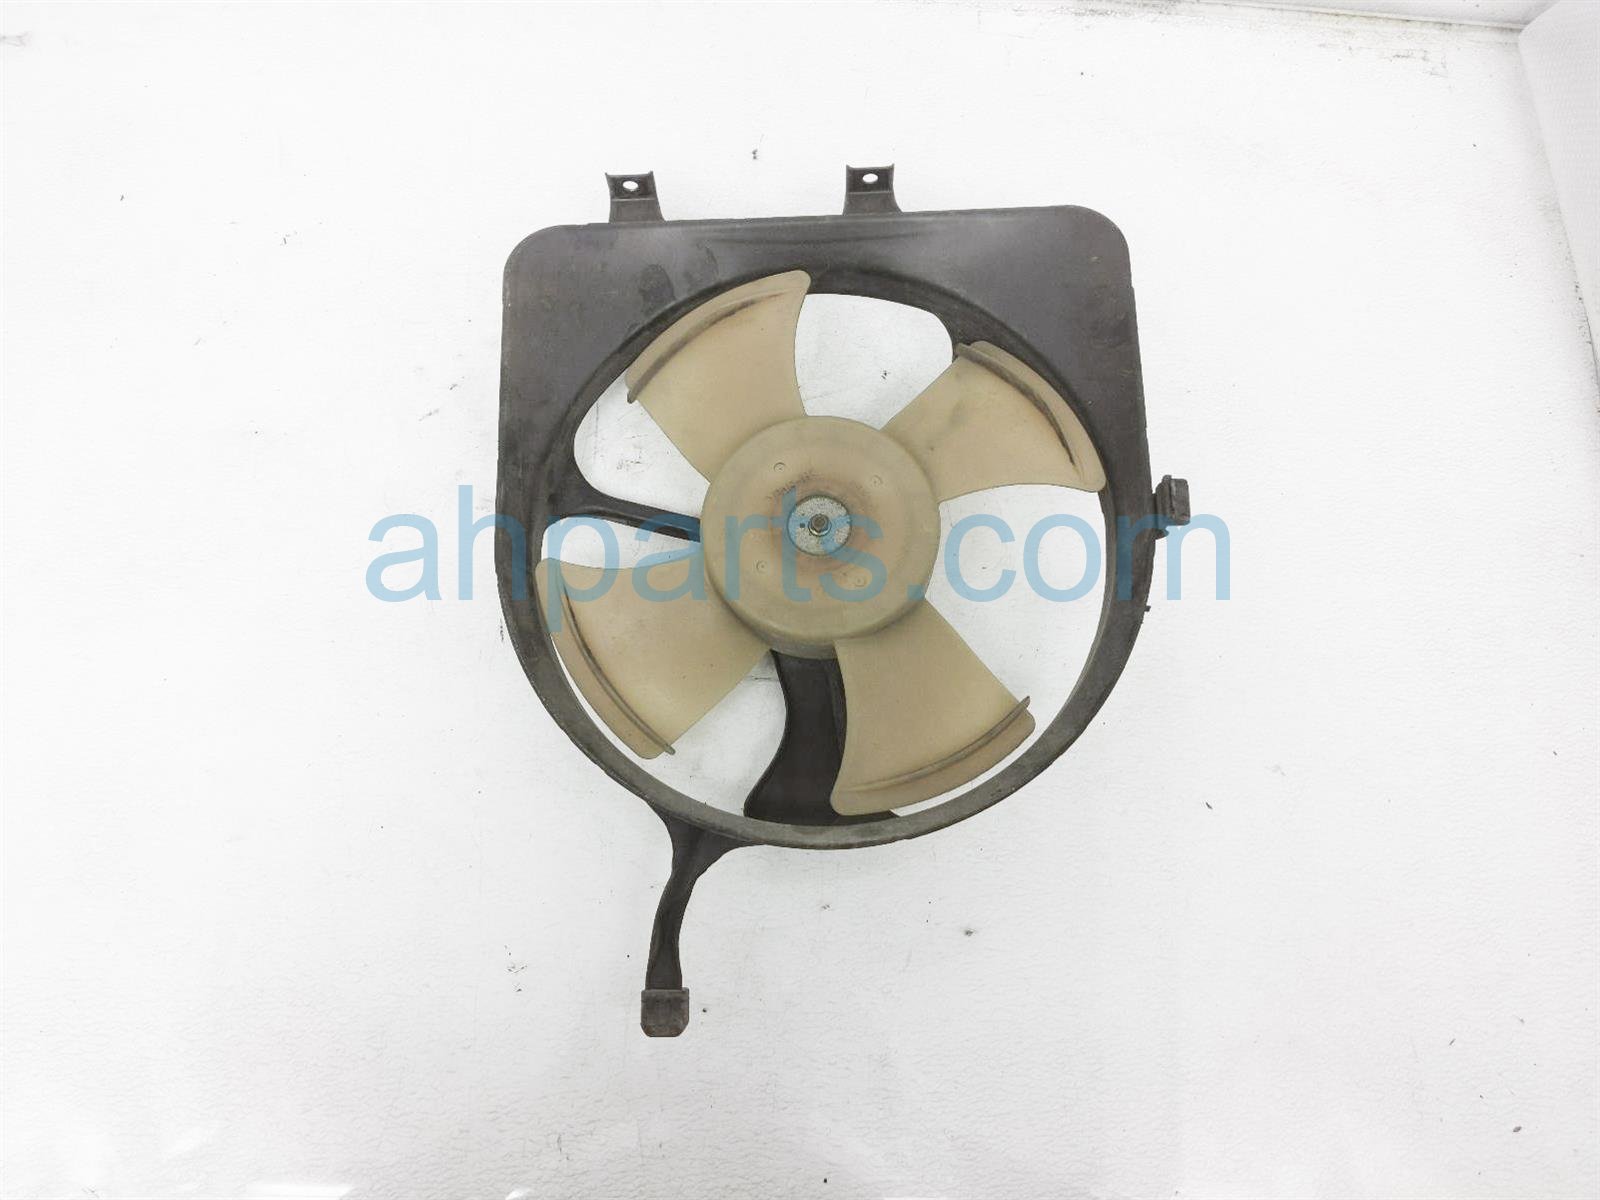 $33 Acura AC CONDENSER FAN ASSEMBLY -